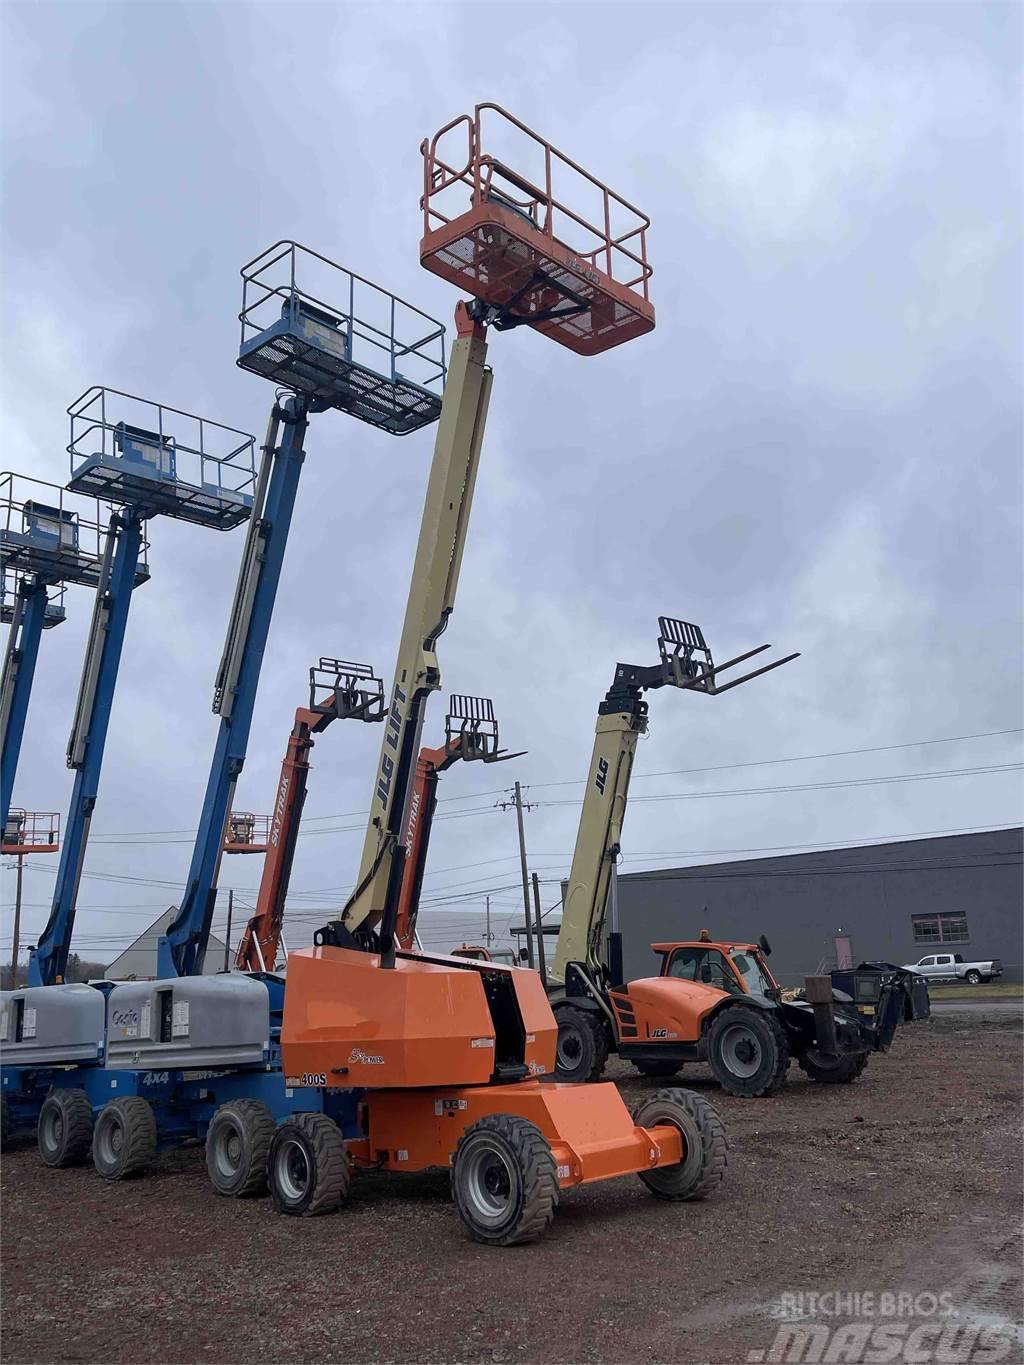 JLG 400S Compact self-propelled boom lifts